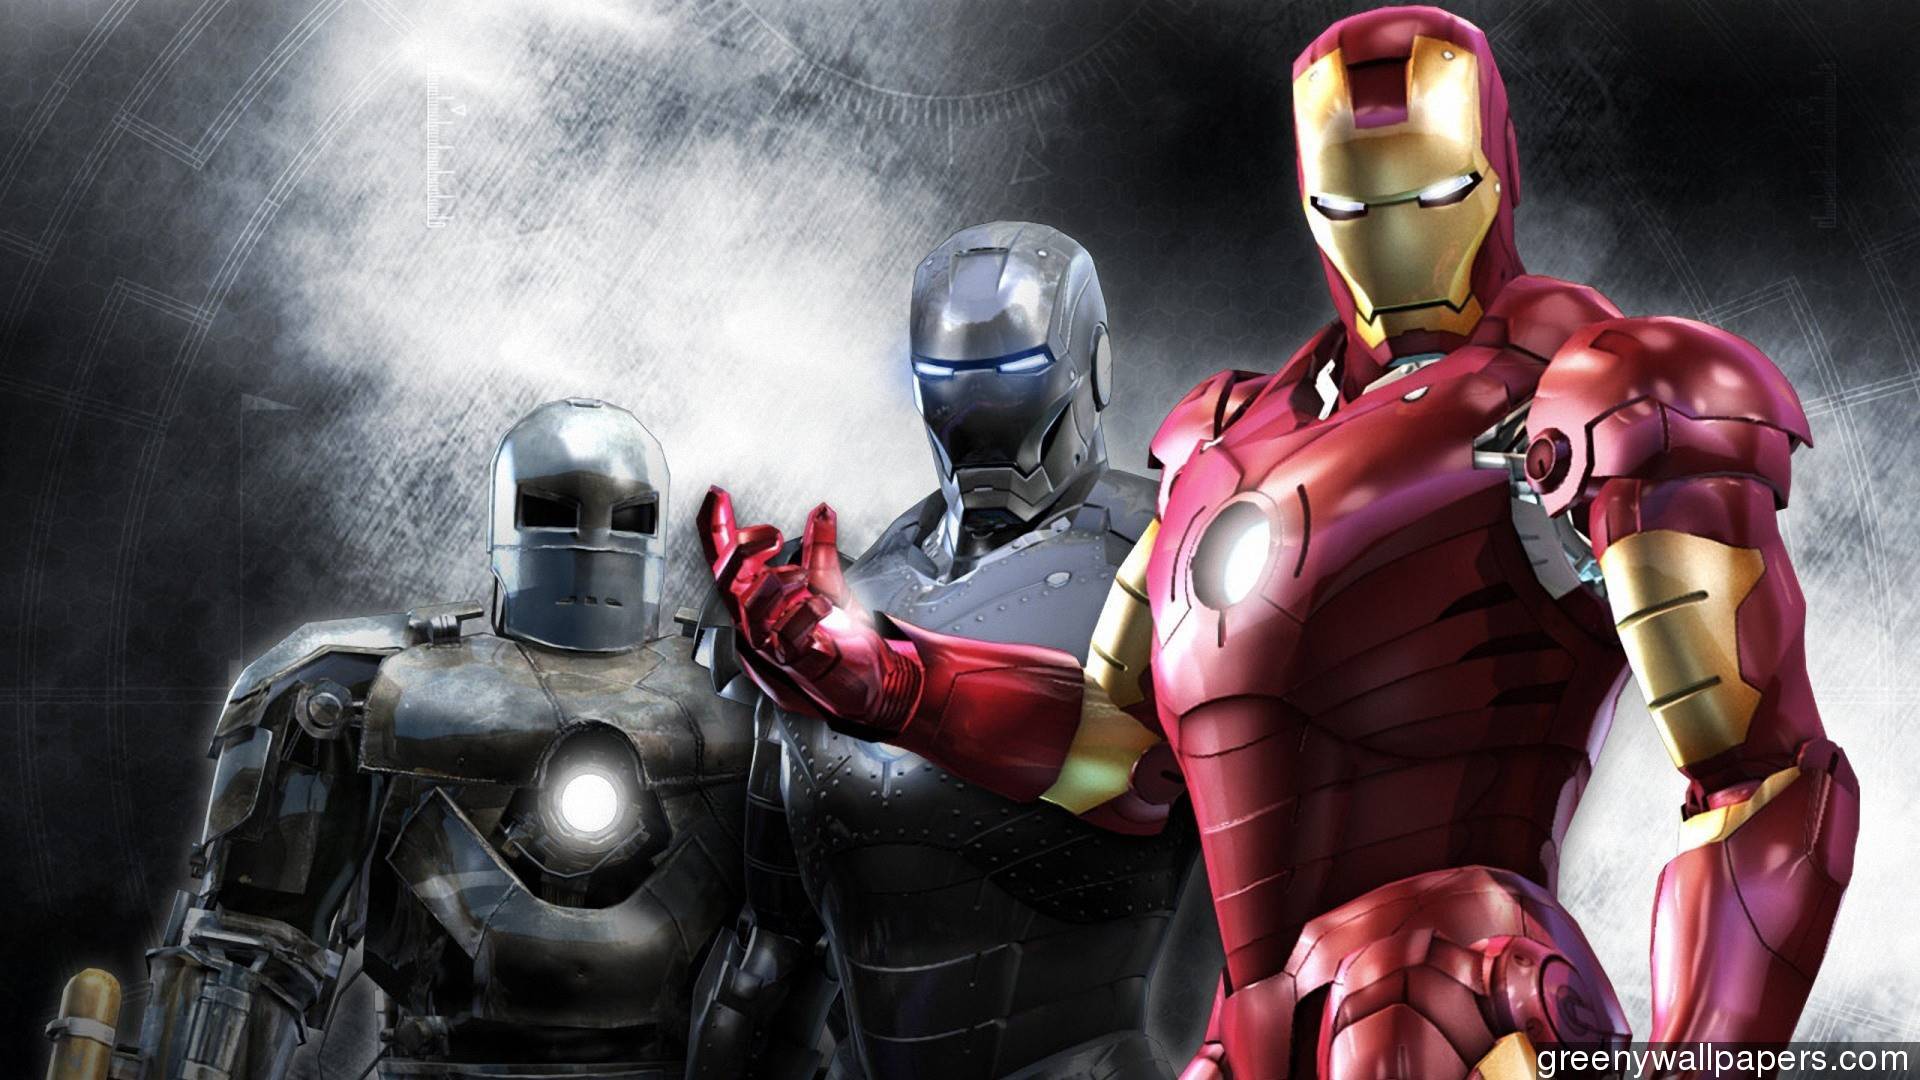 Download Iron Man 3 Suits Background Hd 1920x1080 Wallpaper